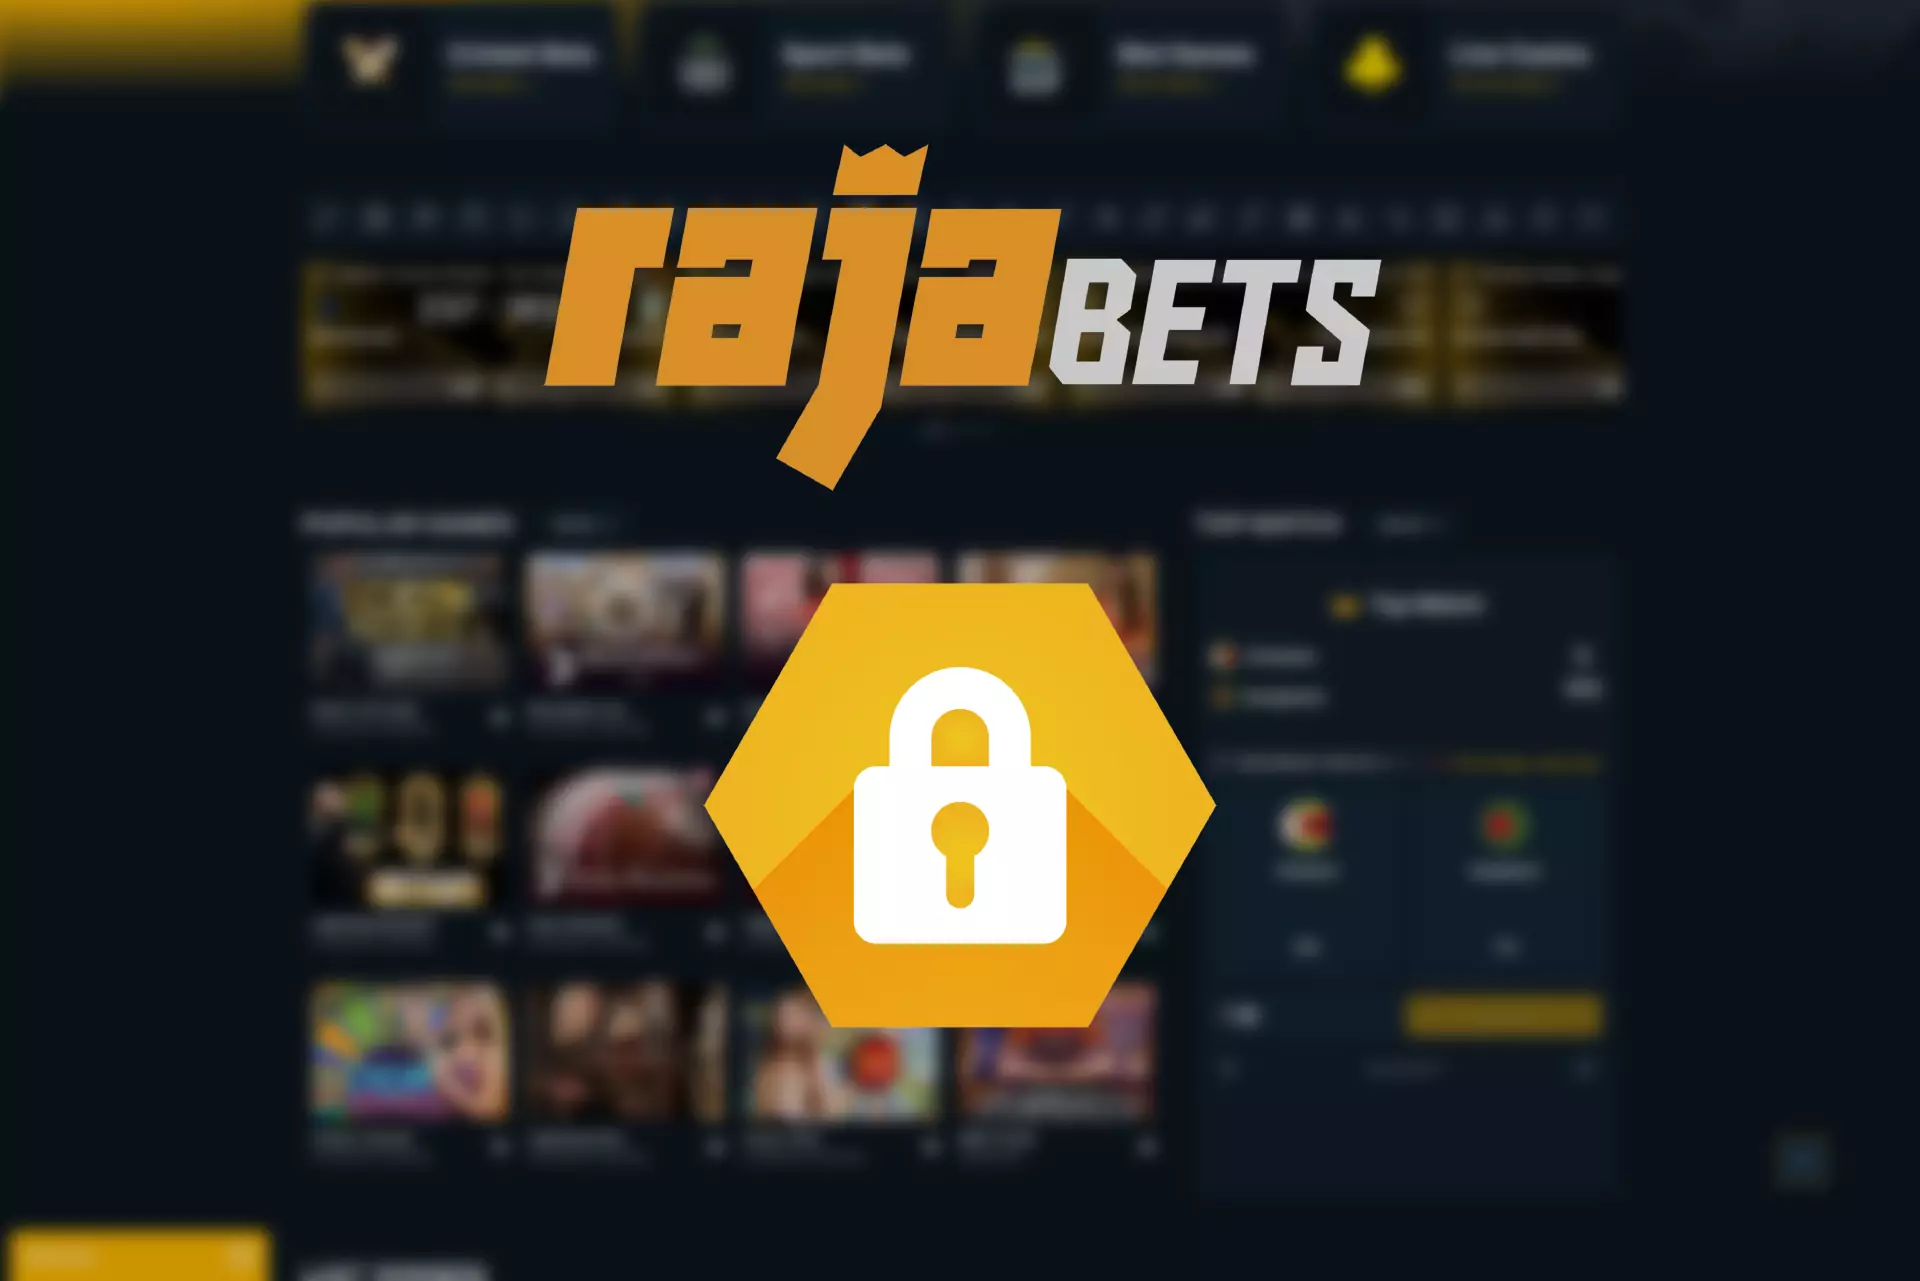 Rajabets protects the personal data of its users by using encryption algorithms.